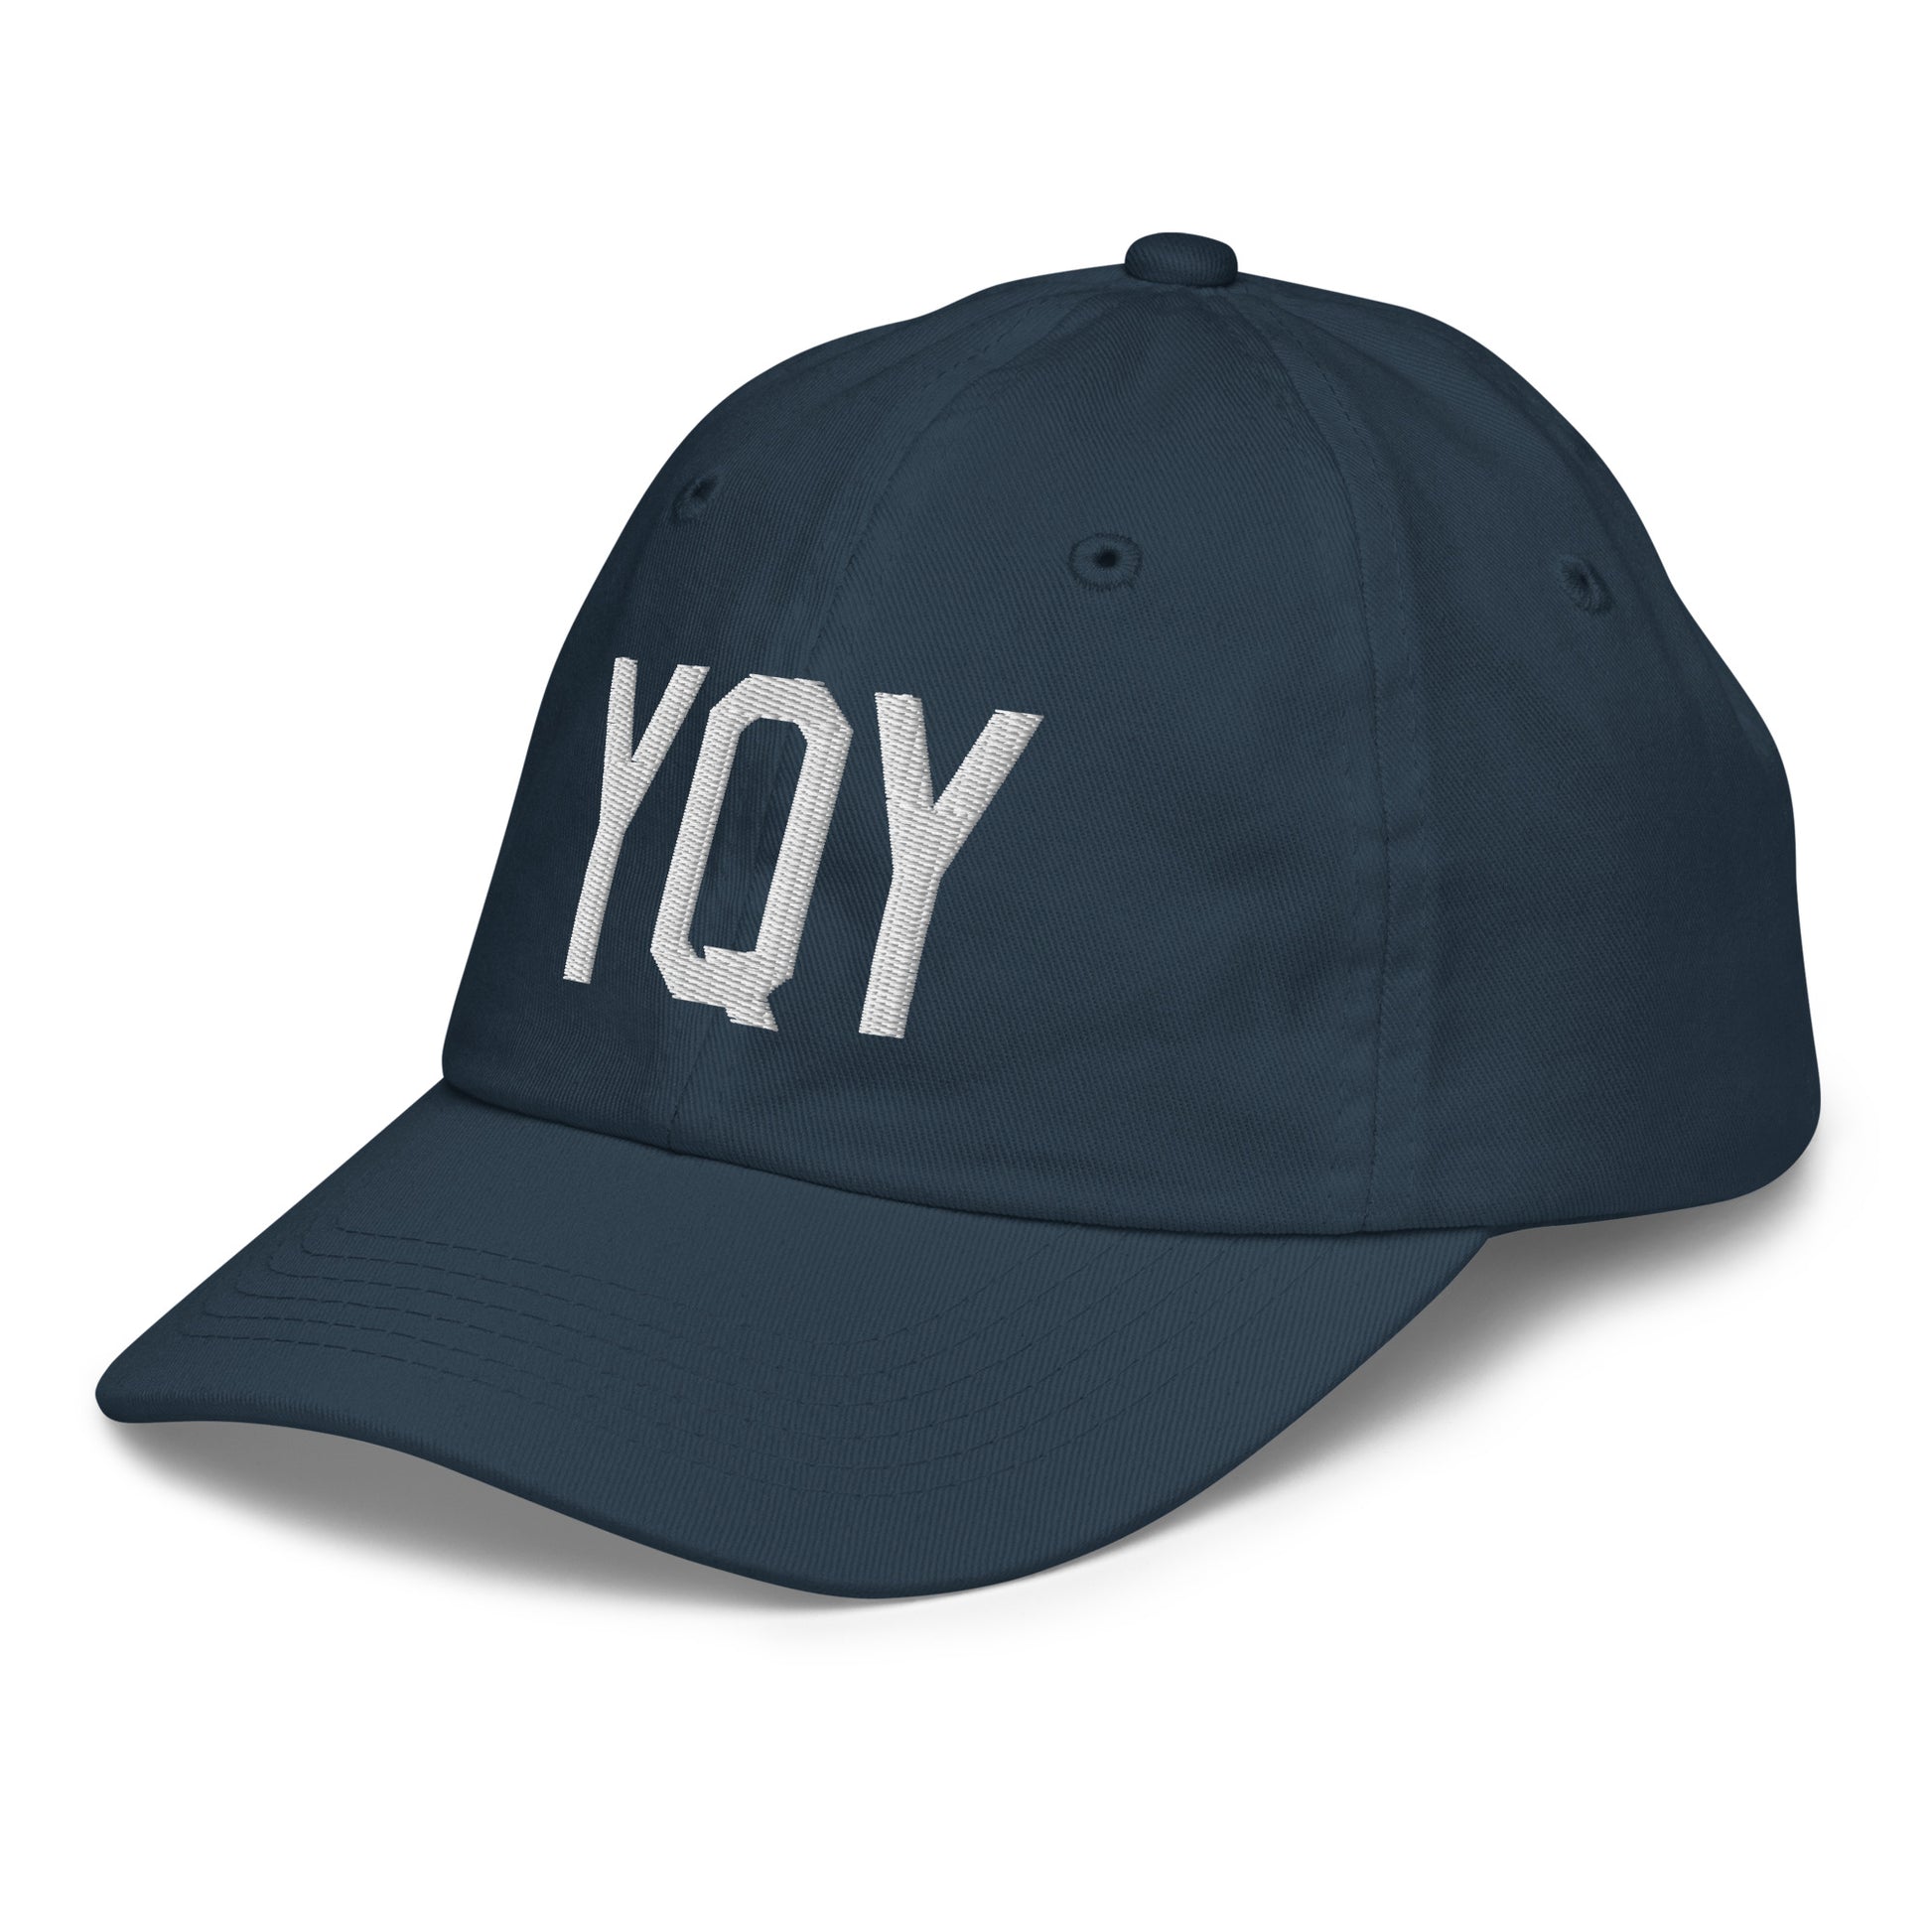 Airport Code Kid's Baseball Cap - White • YQY Sydney • YHM Designs - Image 16